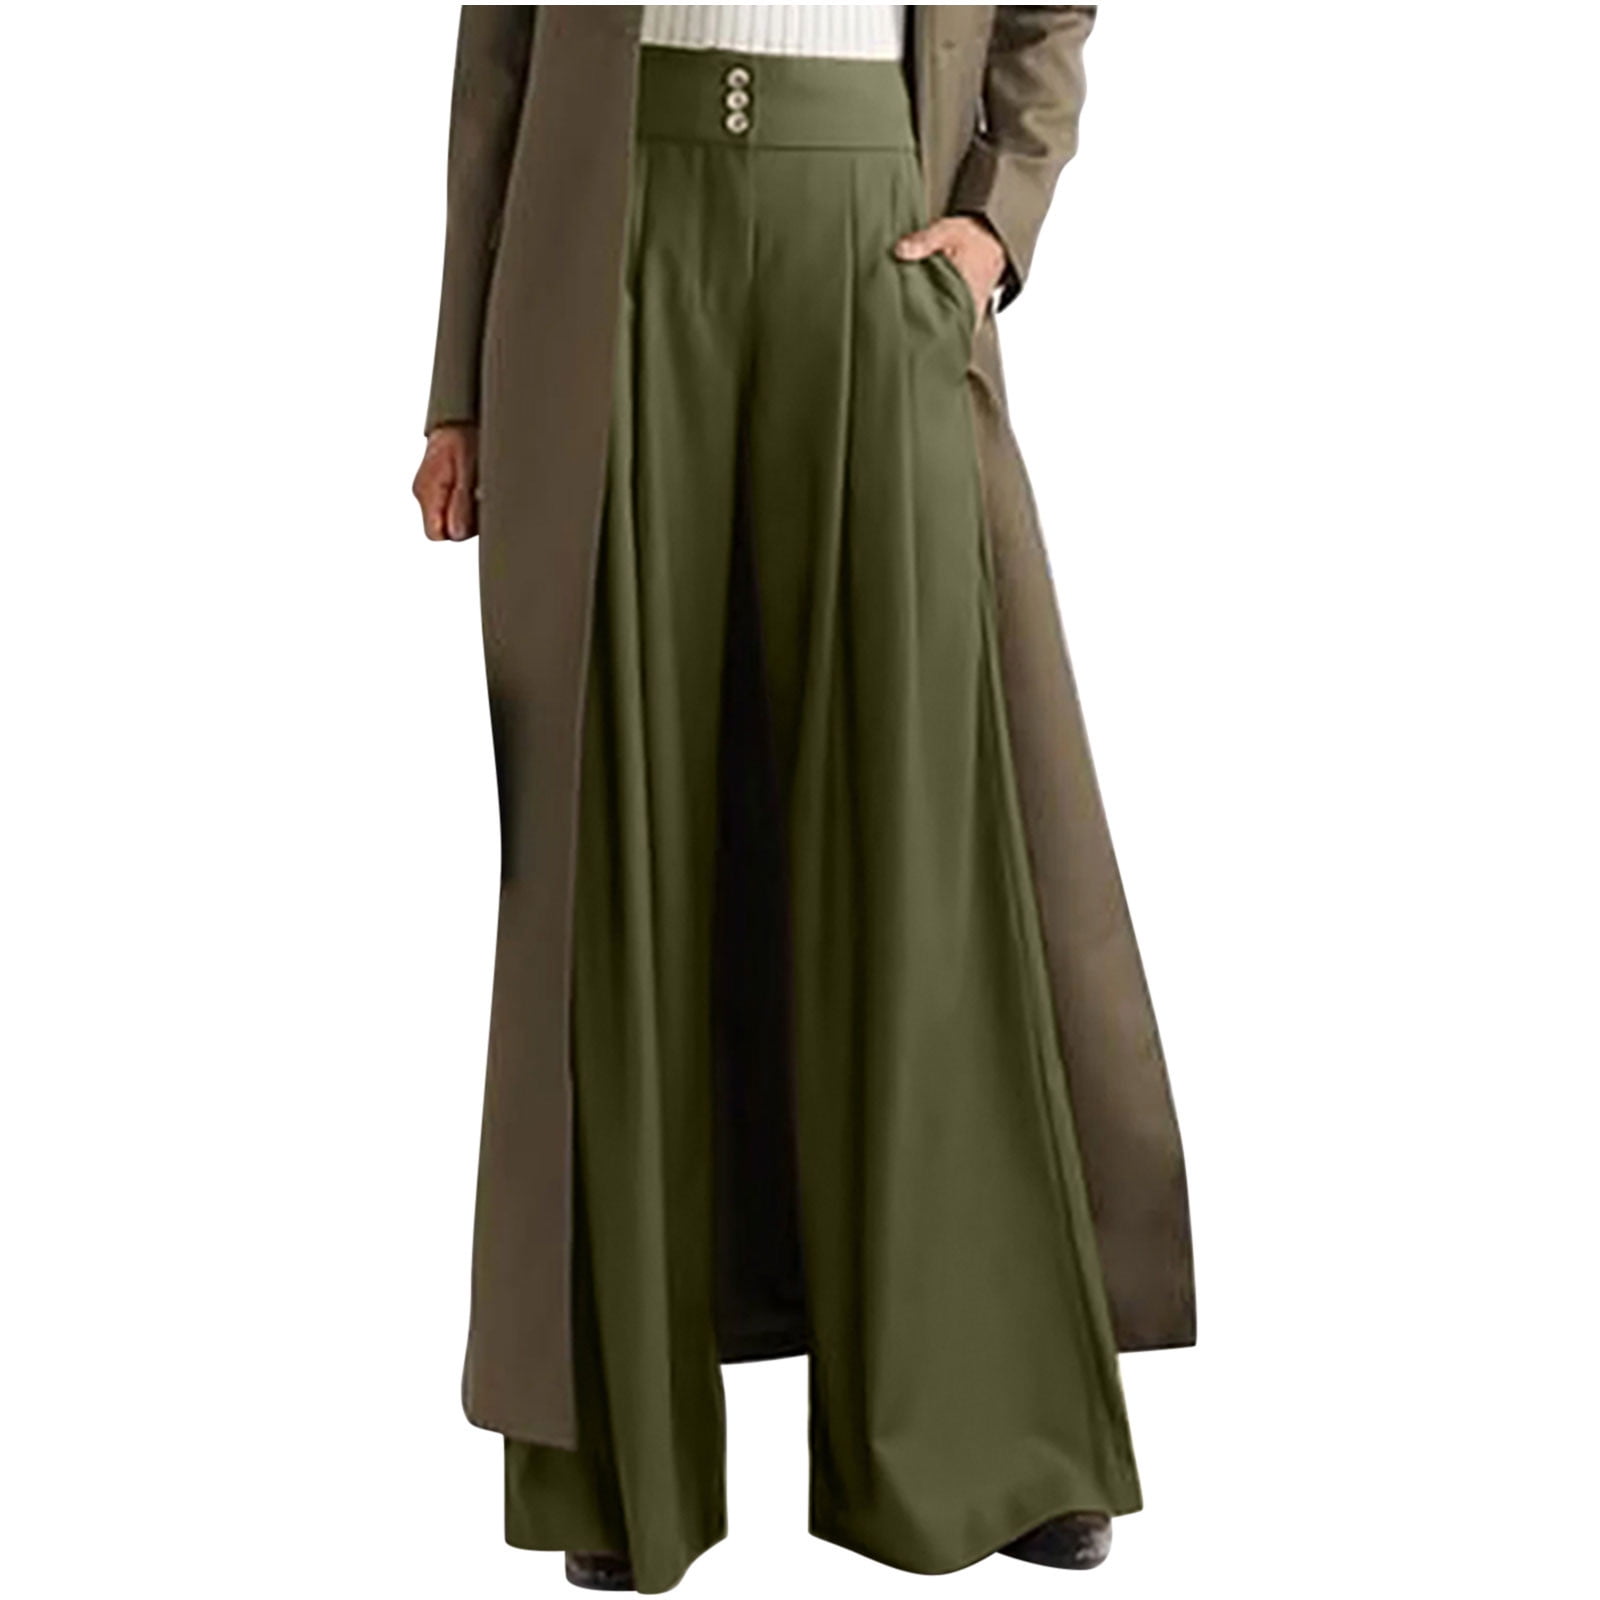 Women's Wide Leg Dress Pants with Pockets, High Waisted Caual Solid ...